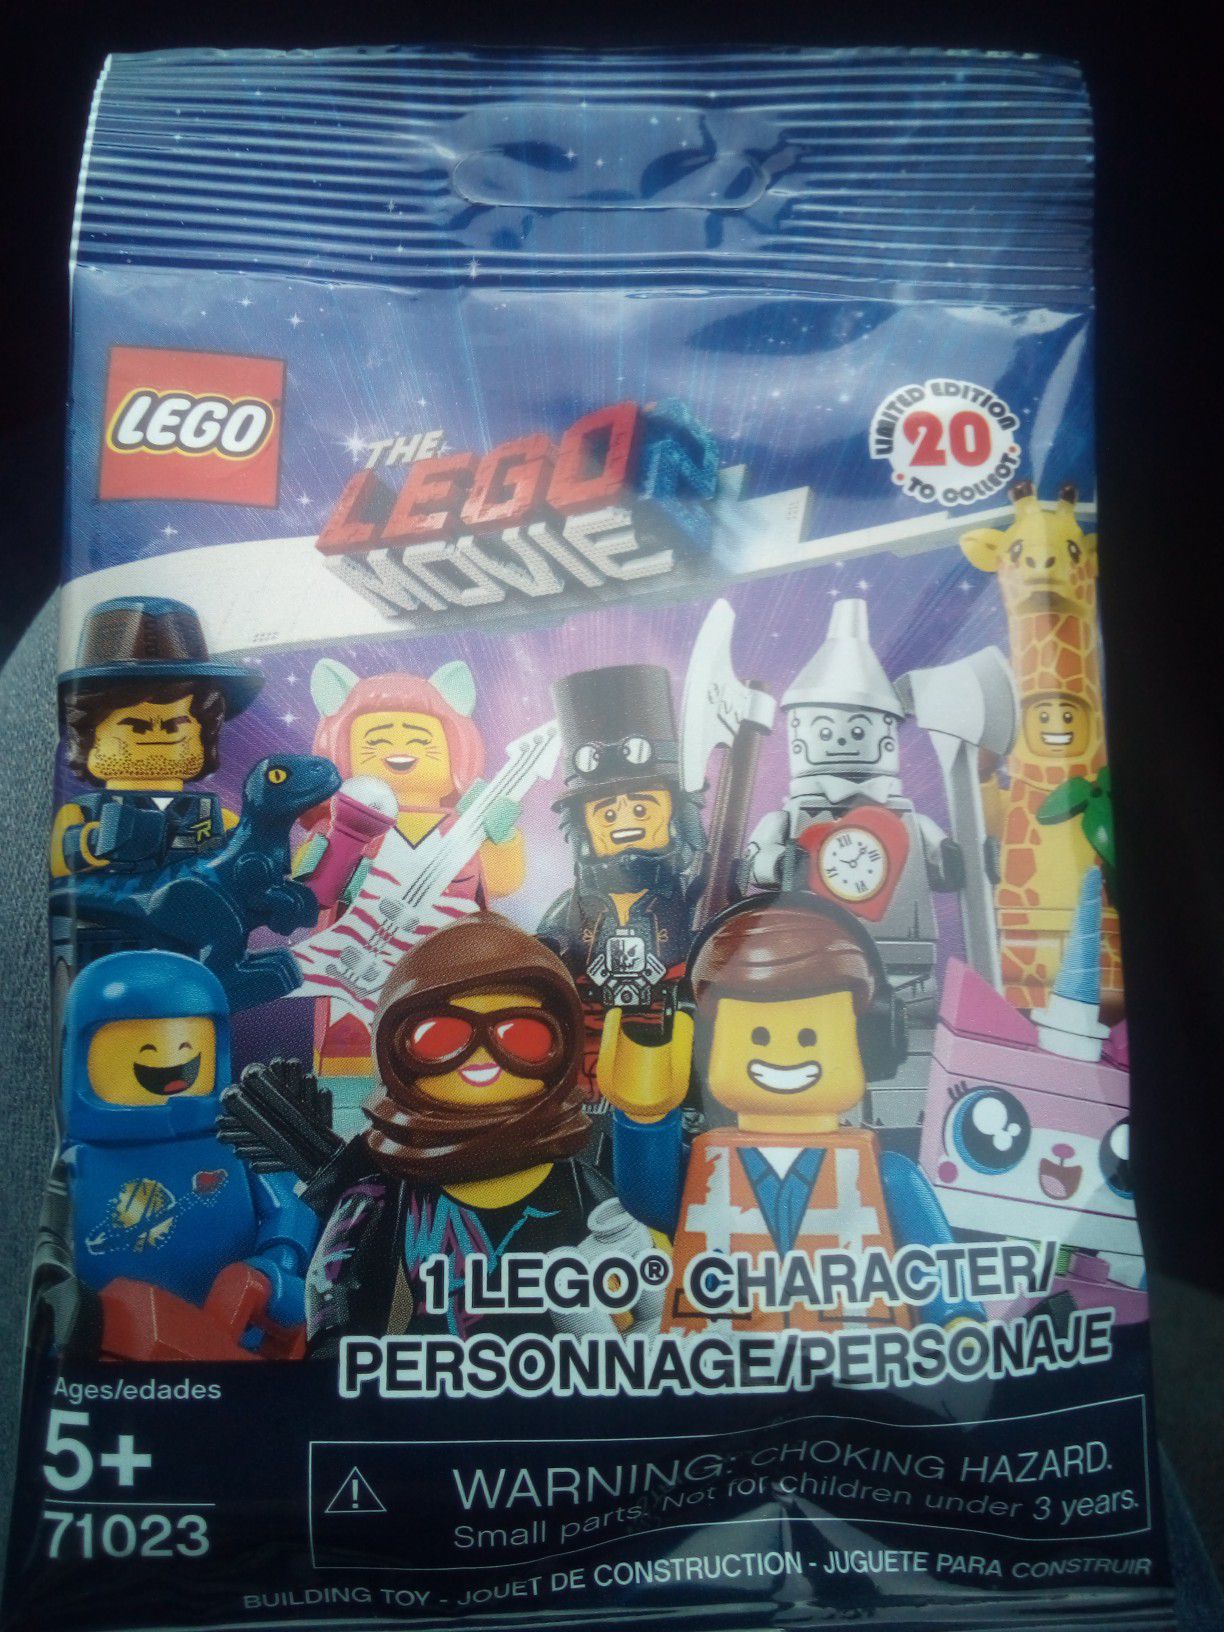 25 Lego bags minifigures from The Lego Movie